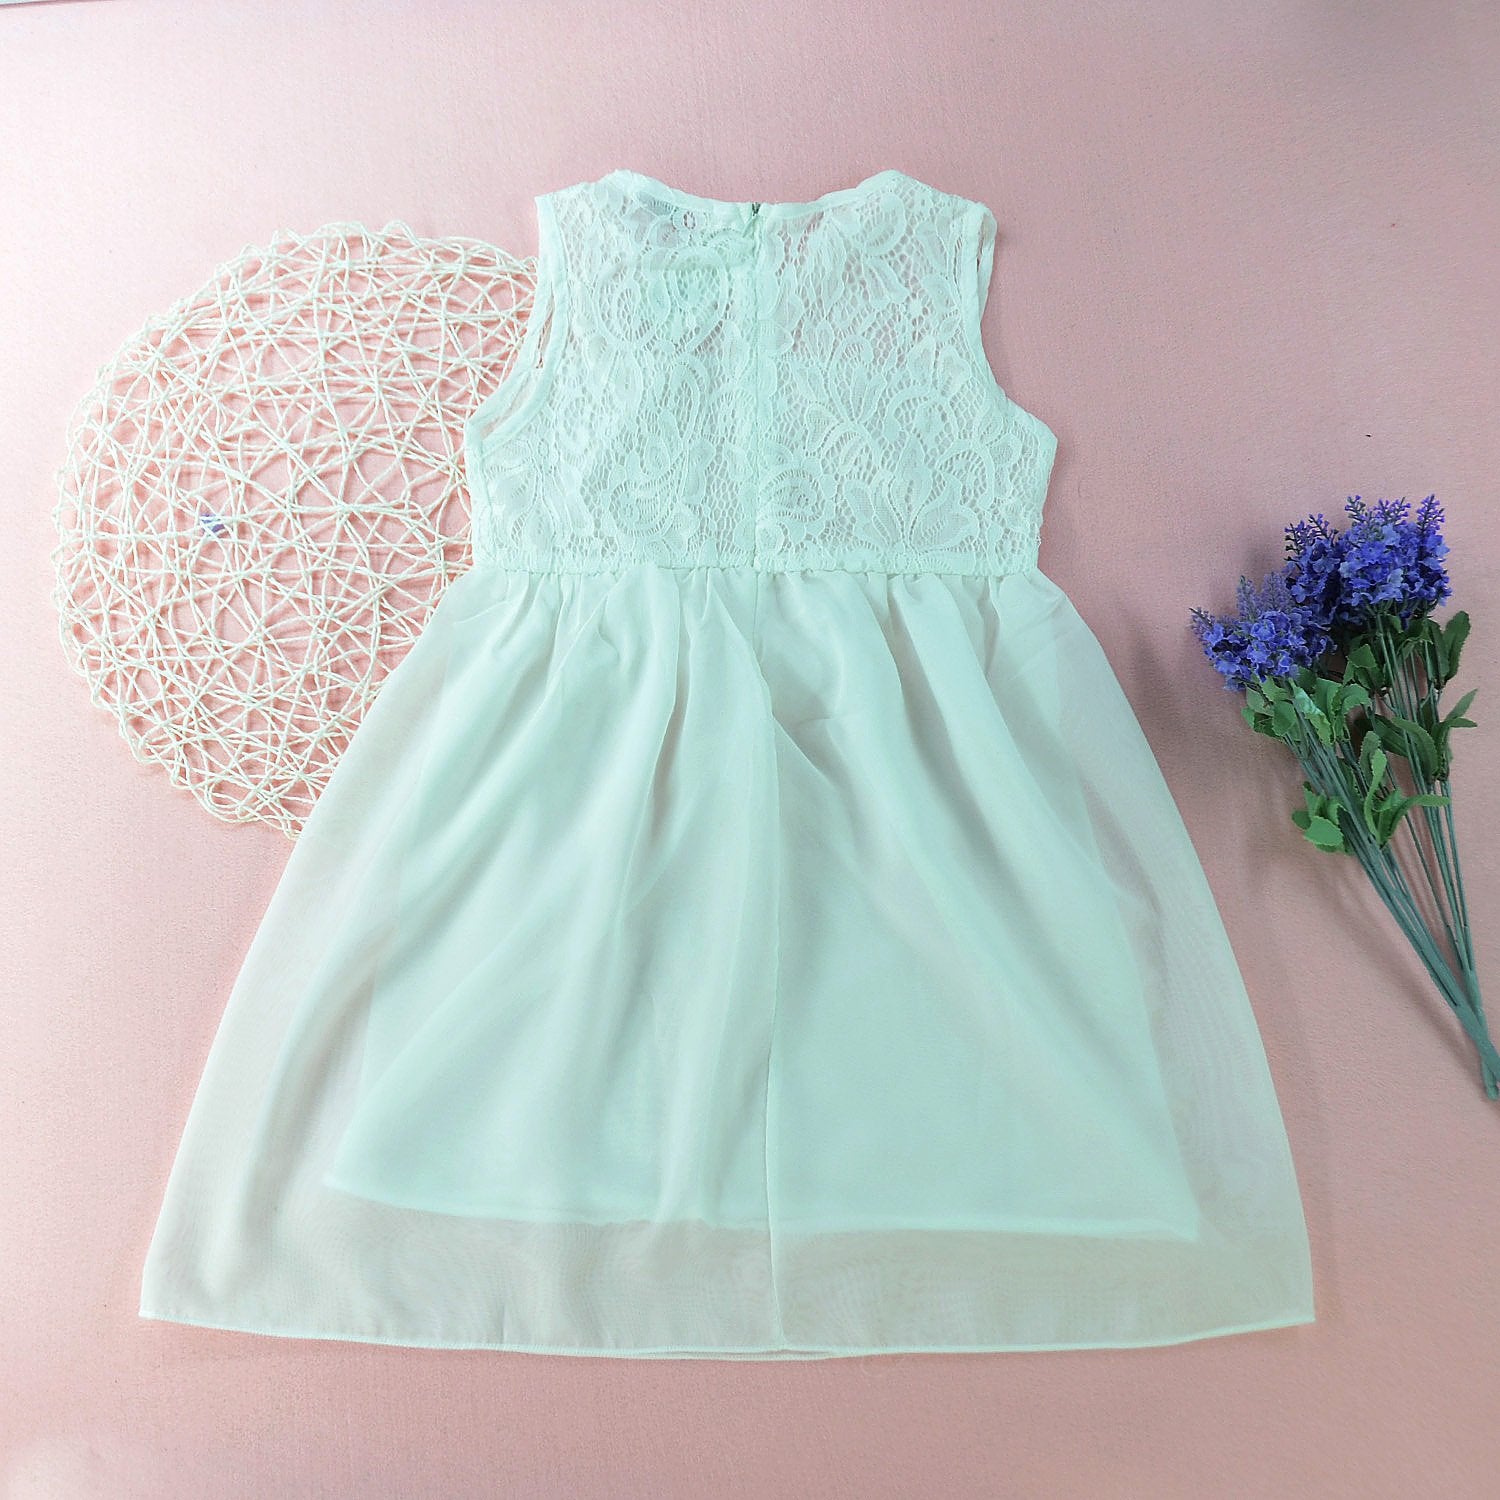 Fashionable Solid Color Tulle Sleeveless Princess Dress